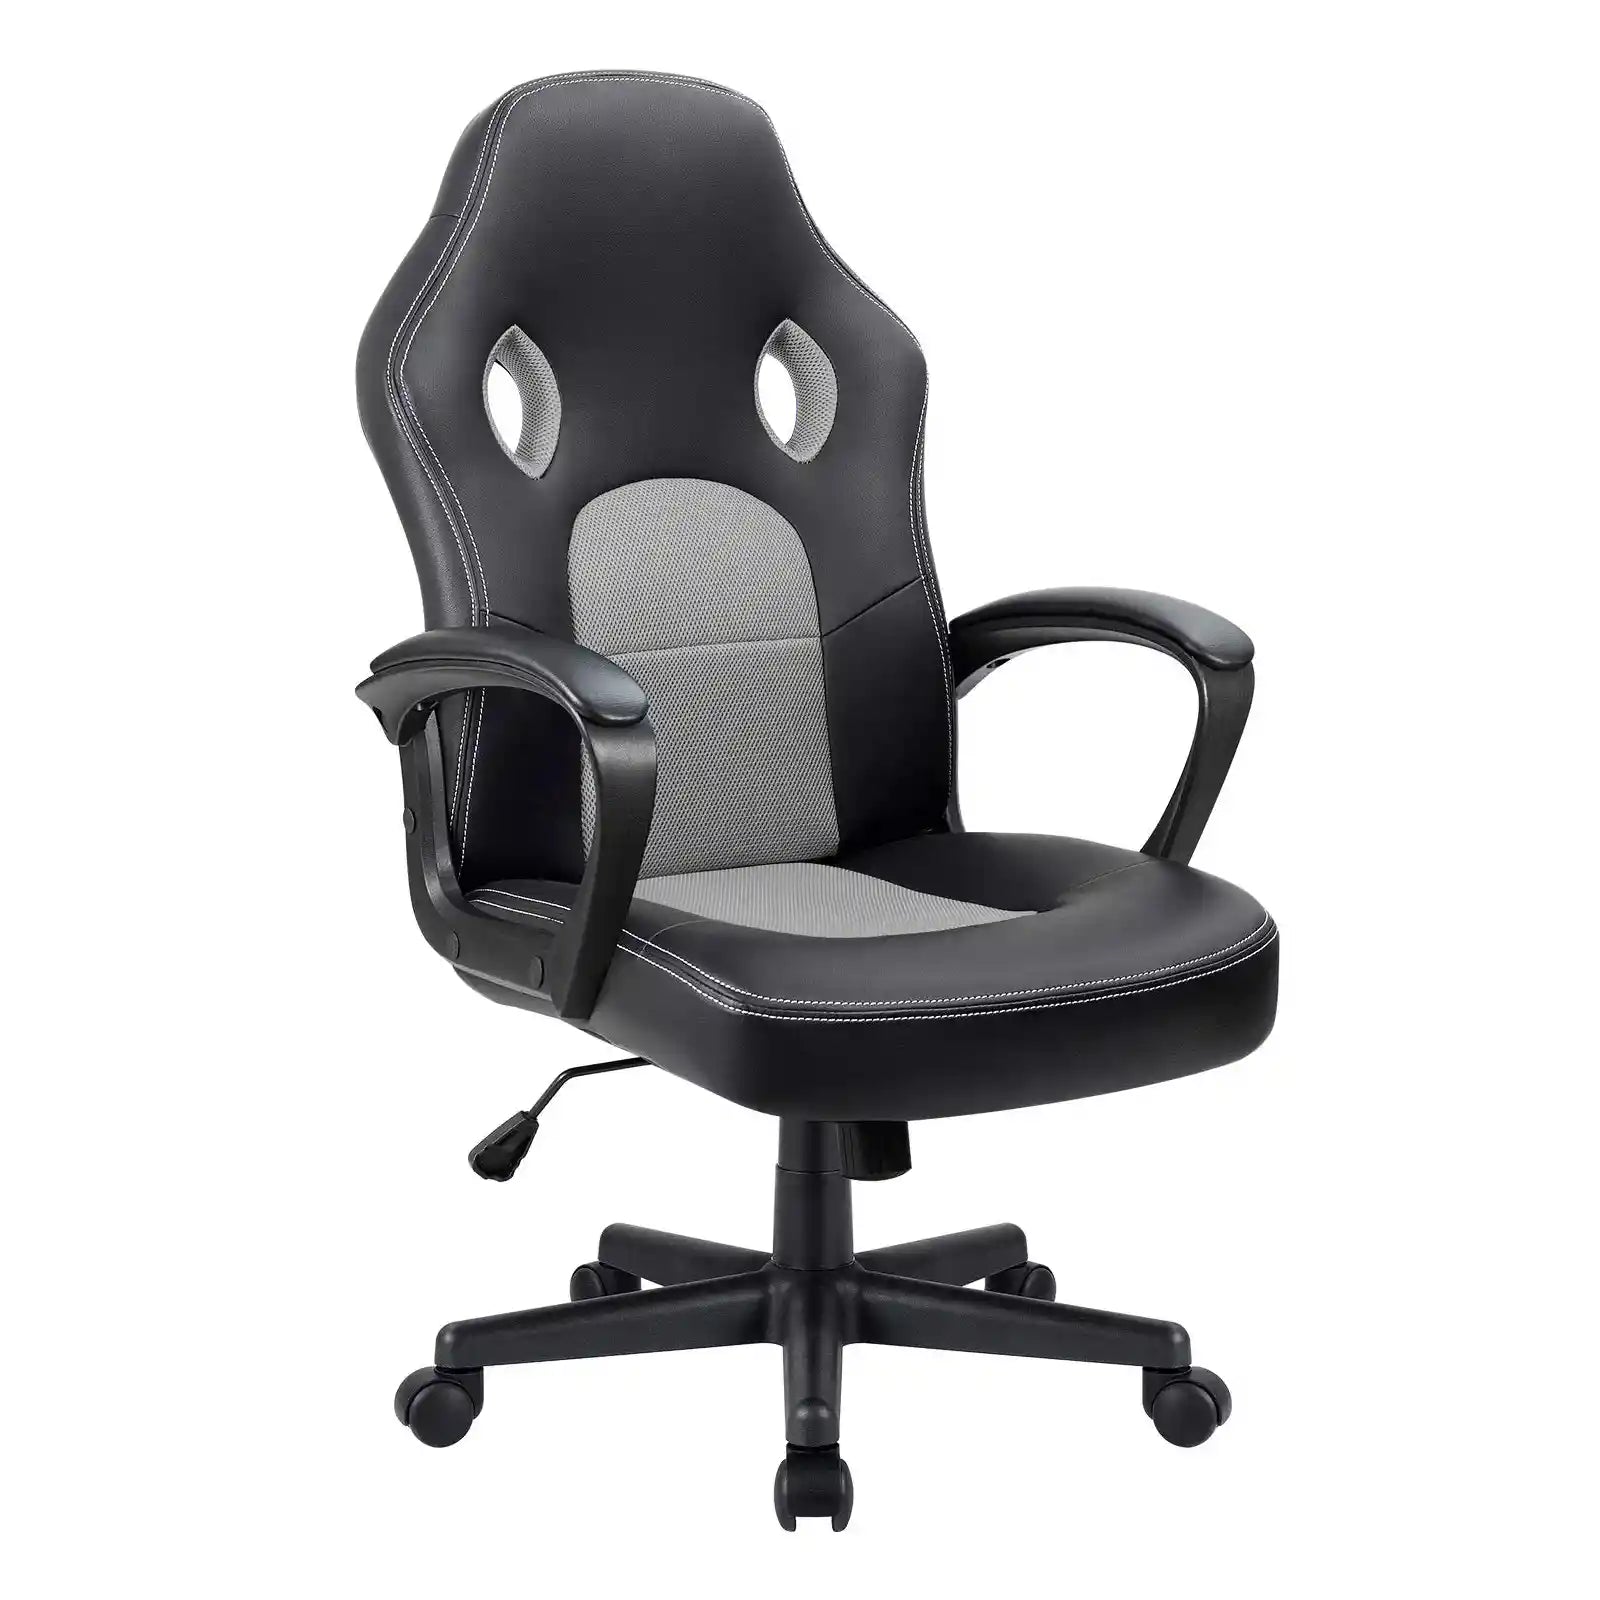 Faux Leather Computer Gaming Chair Office Desk Chair with Lumbar Support